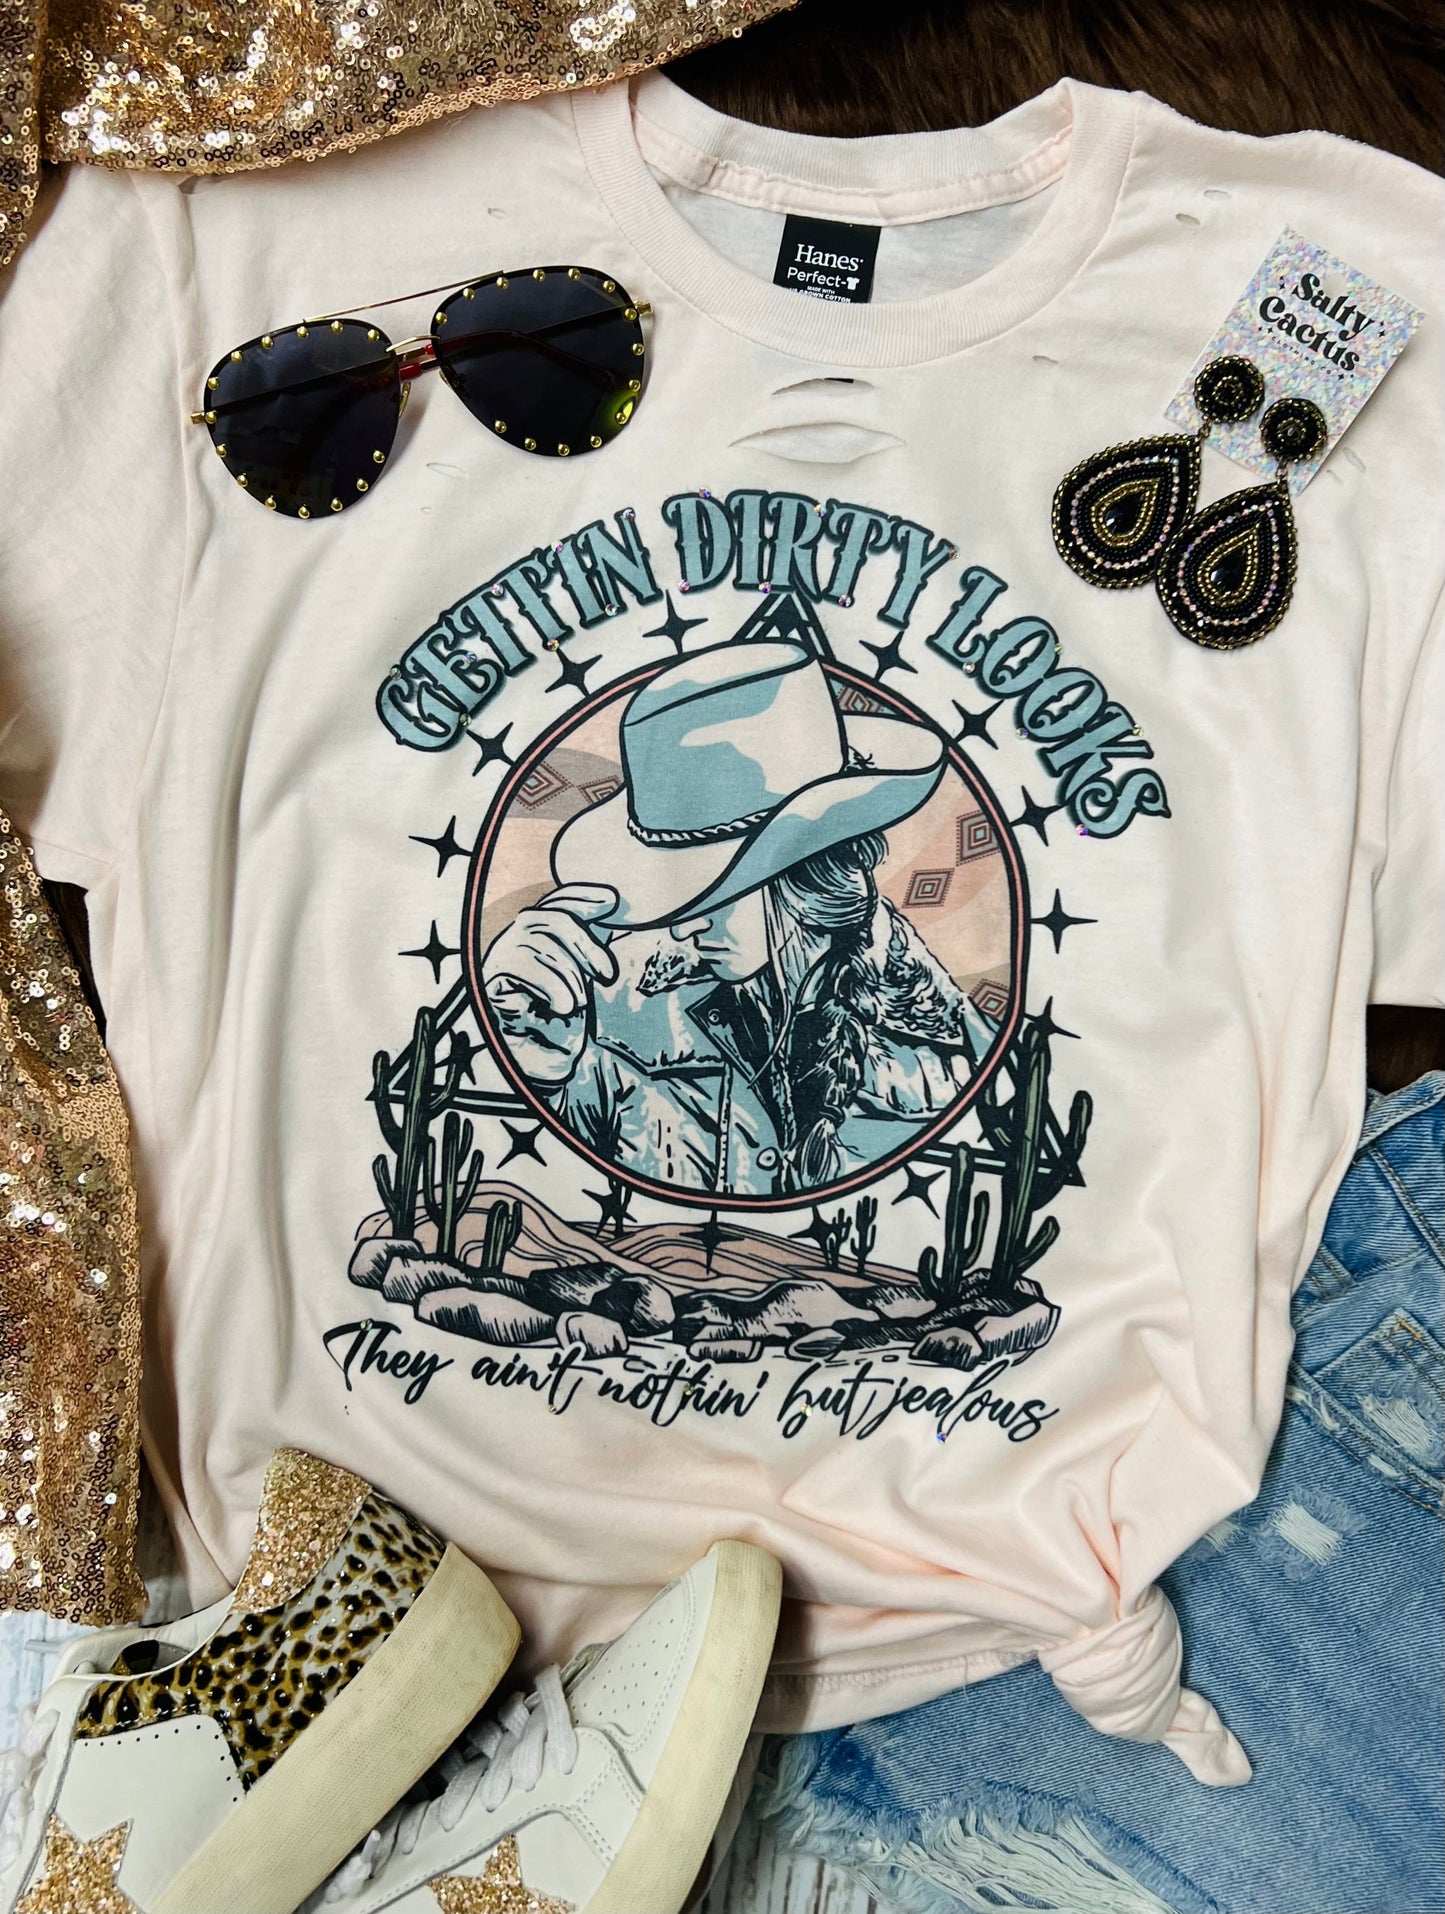 Gettin Dirty Looks *Distressed* and *Embellished* Blossom Blush Tee